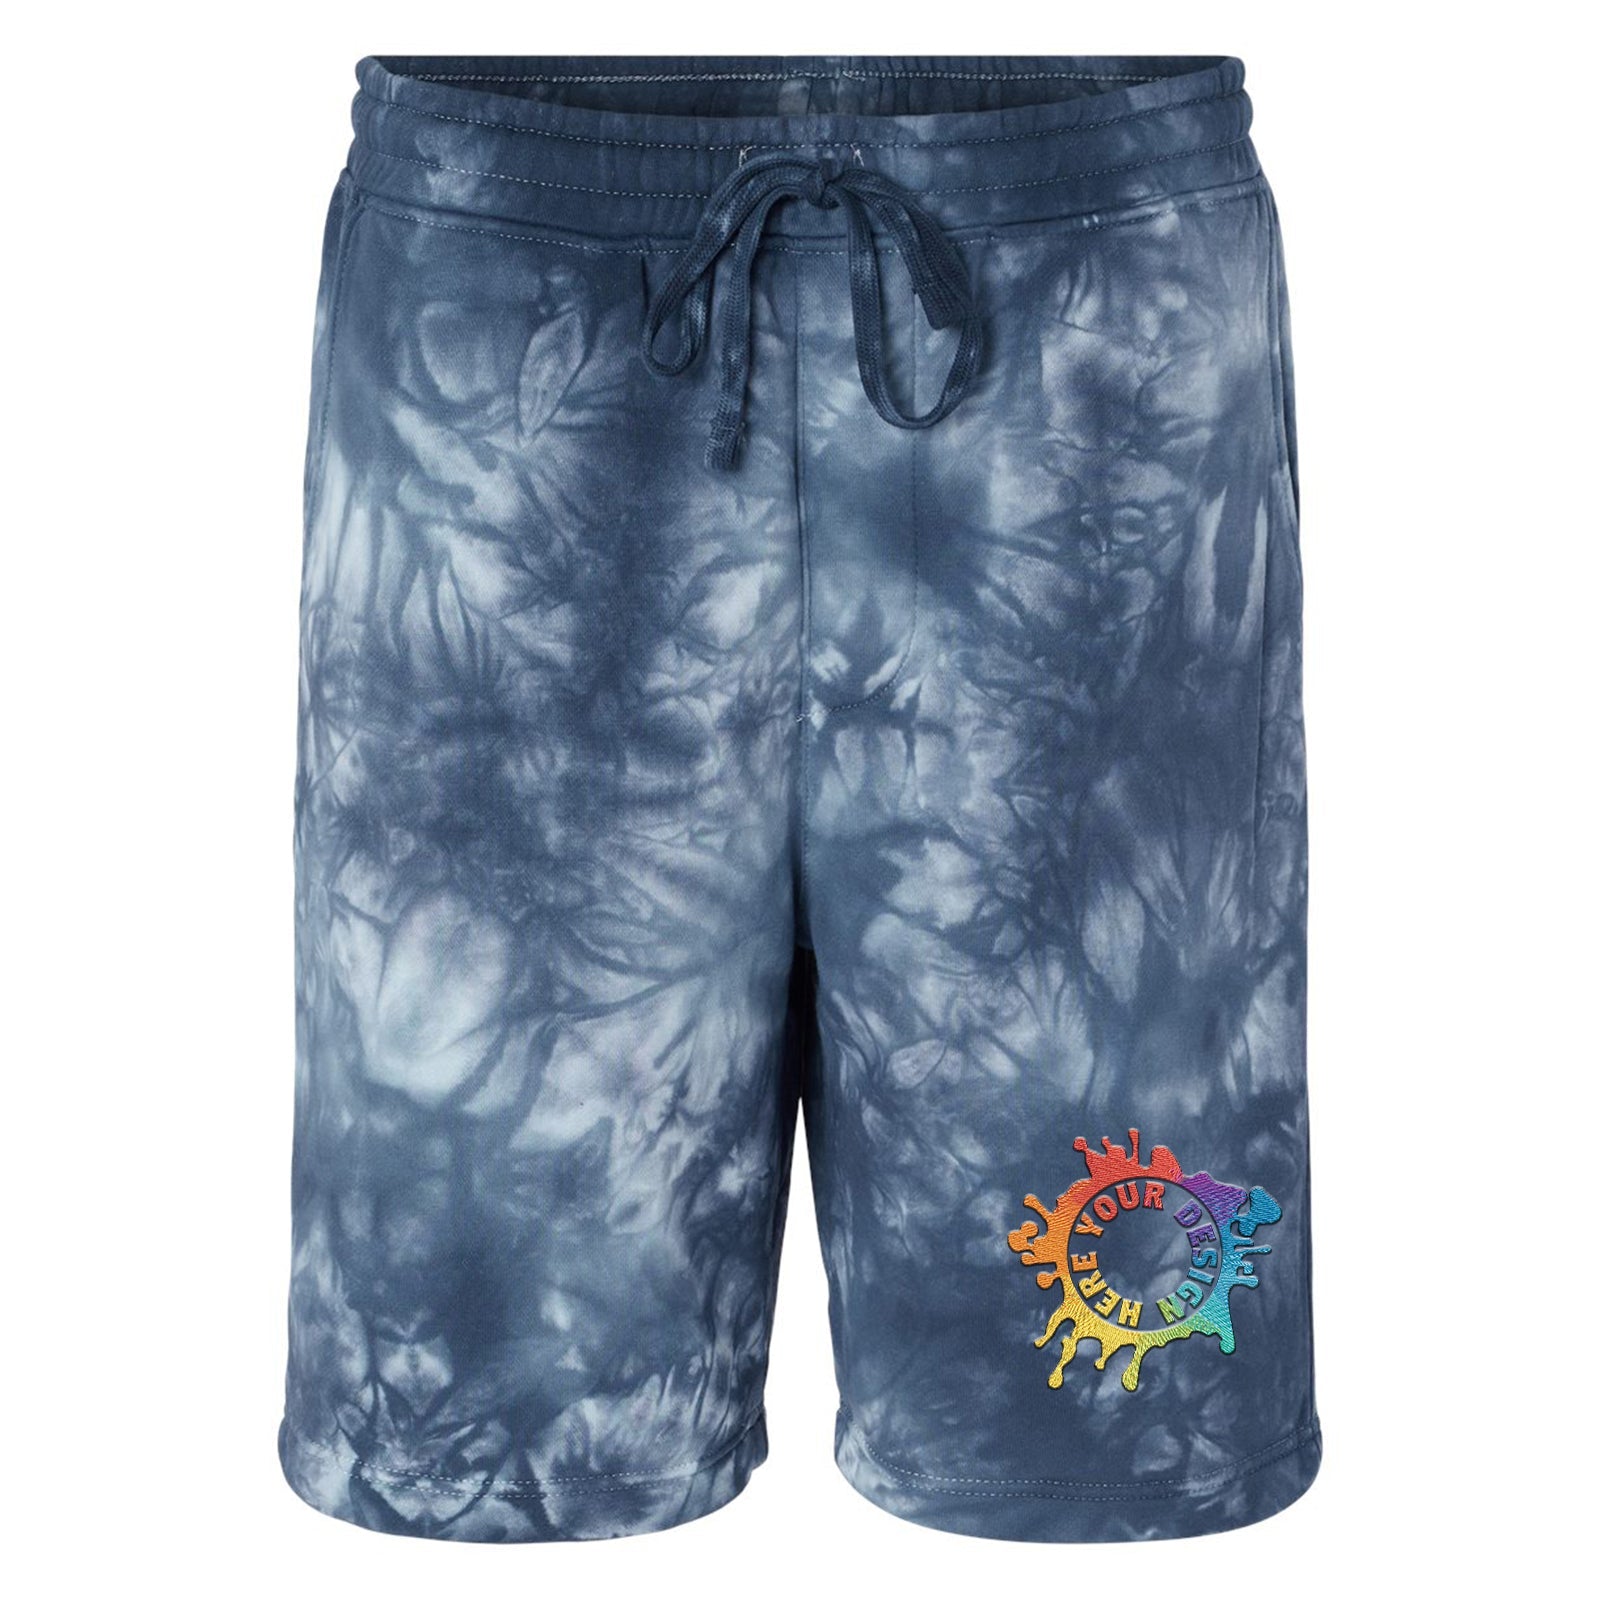 Independent Trading Co. Tie-Dyed Fleece Shorts Embroidery - Mato & Hash